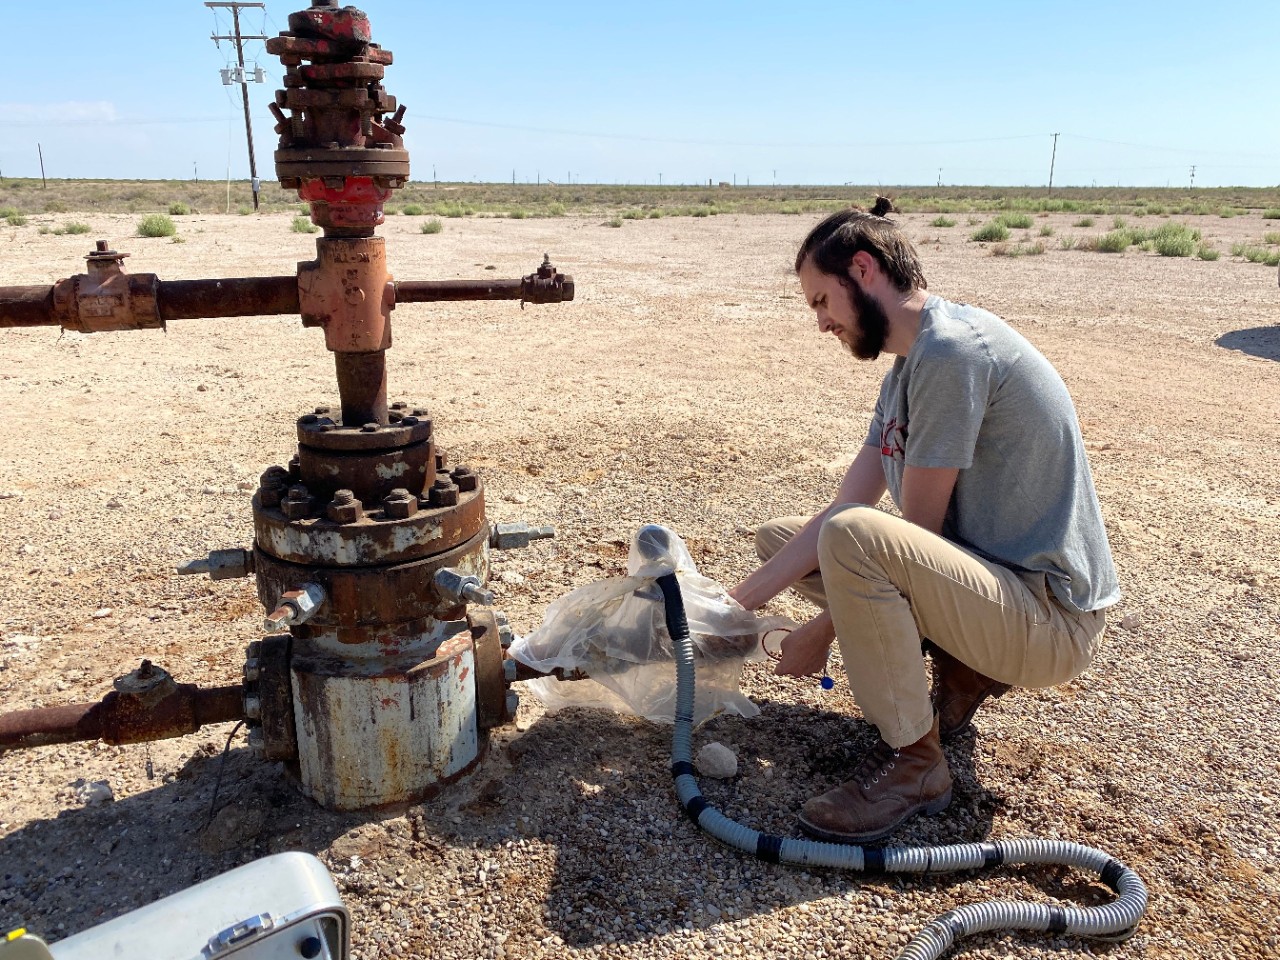 A UC student kneels in a desert next to rusty piping sticking out of the ground and holds electronic equipment.